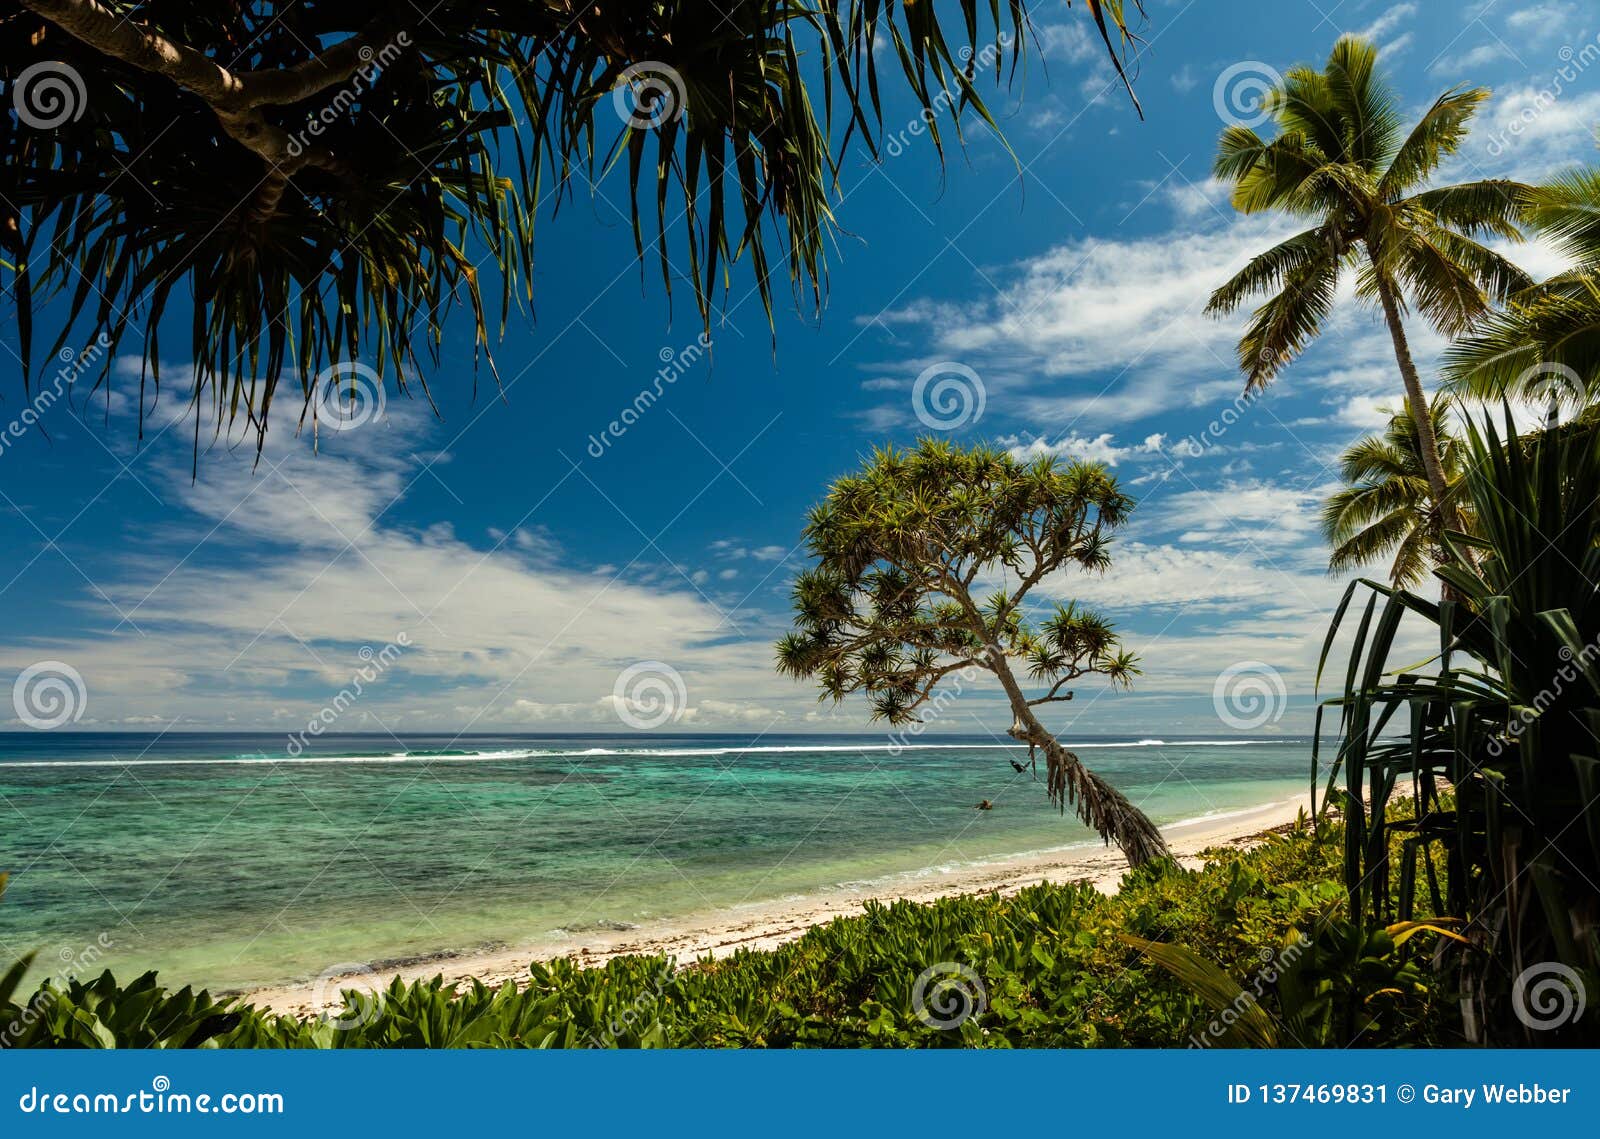 beach with palm trees on the south pacific island of tonga